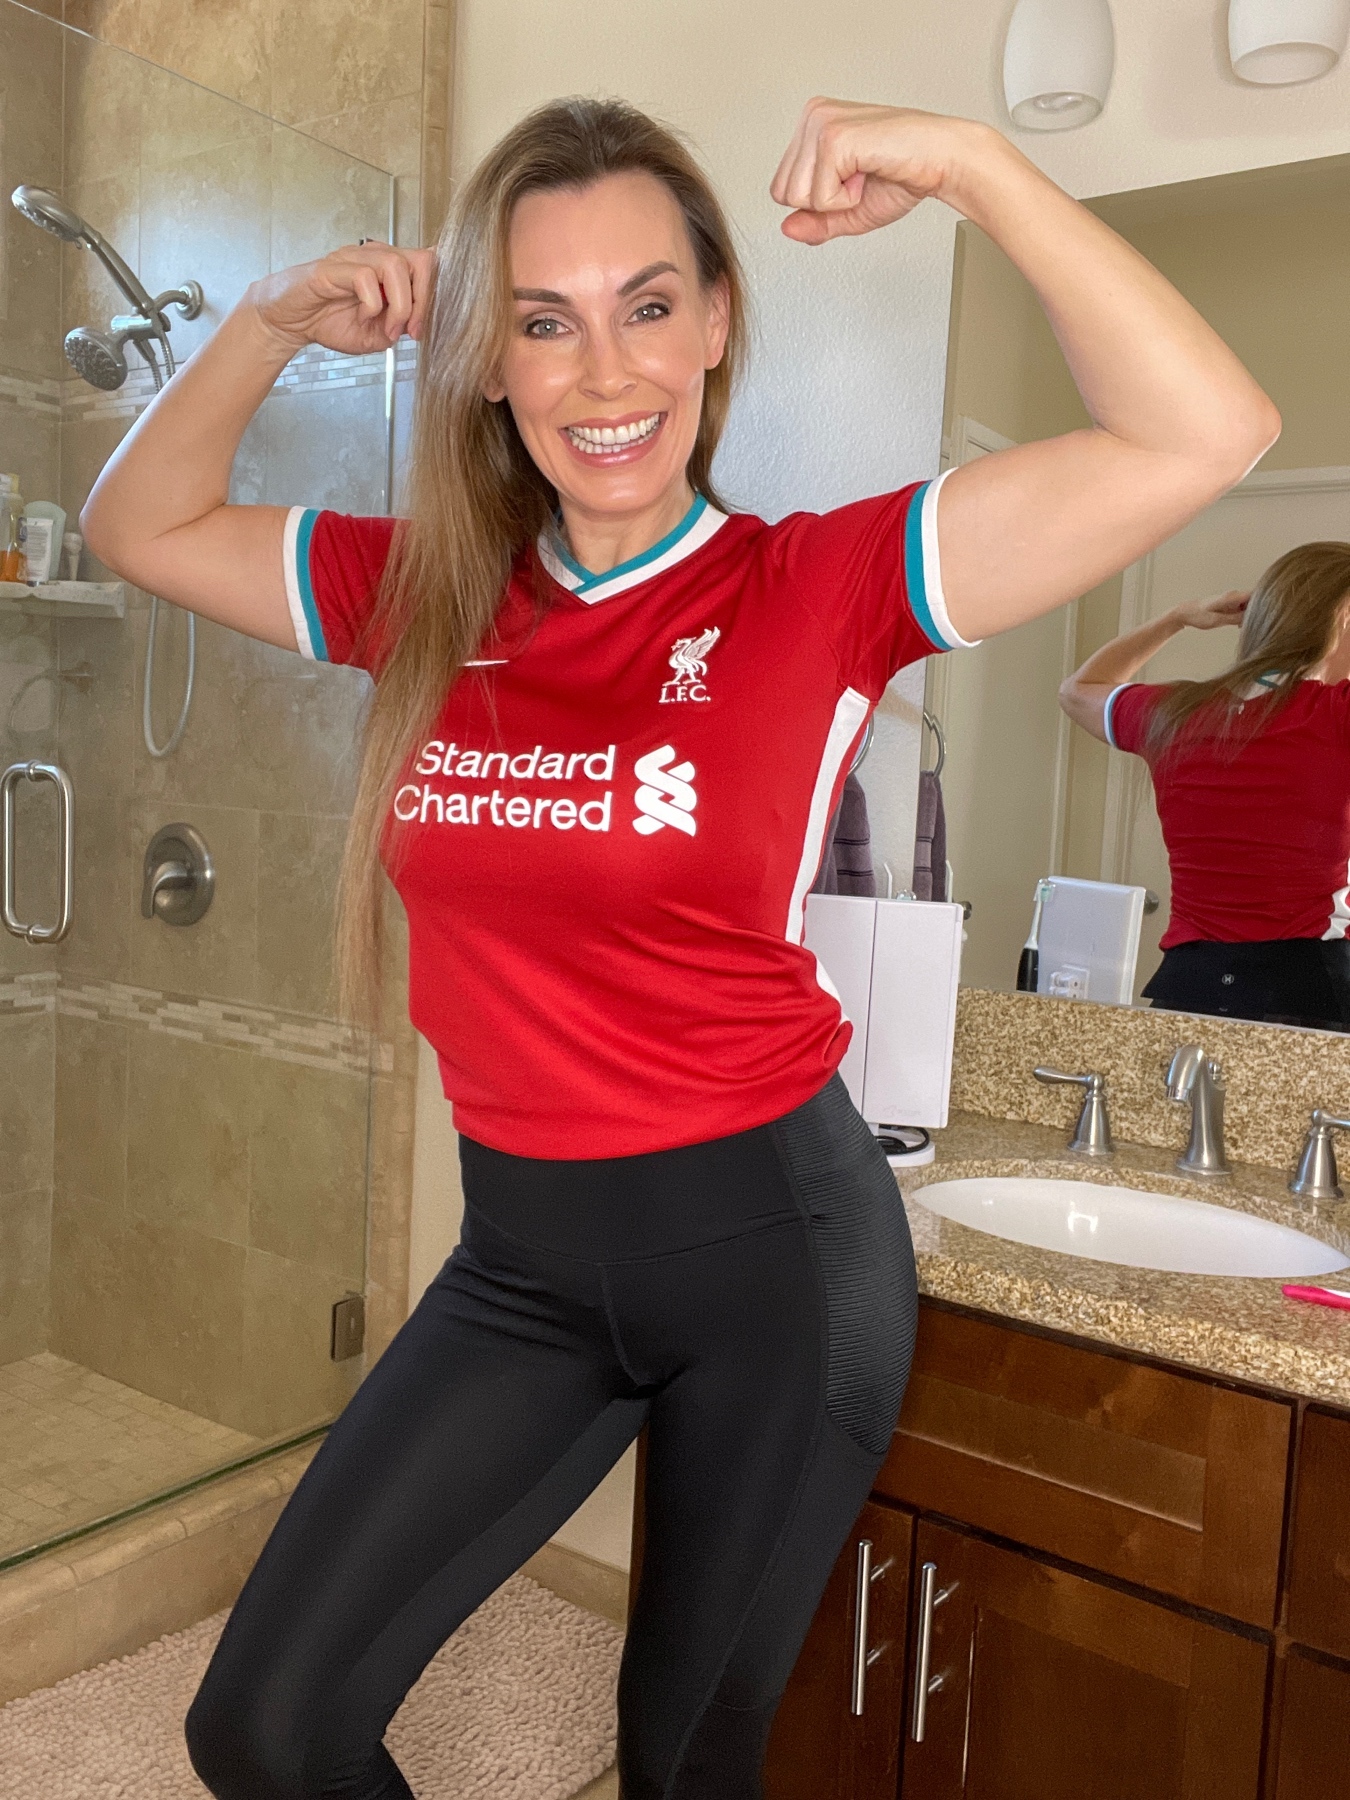 Tanya Tate Spandex - TW Pornstars - Tanyatate. Twitter. #livestream It's  #InternationalBeingYouDay What can you. 3:03 PM - 22 May 2021